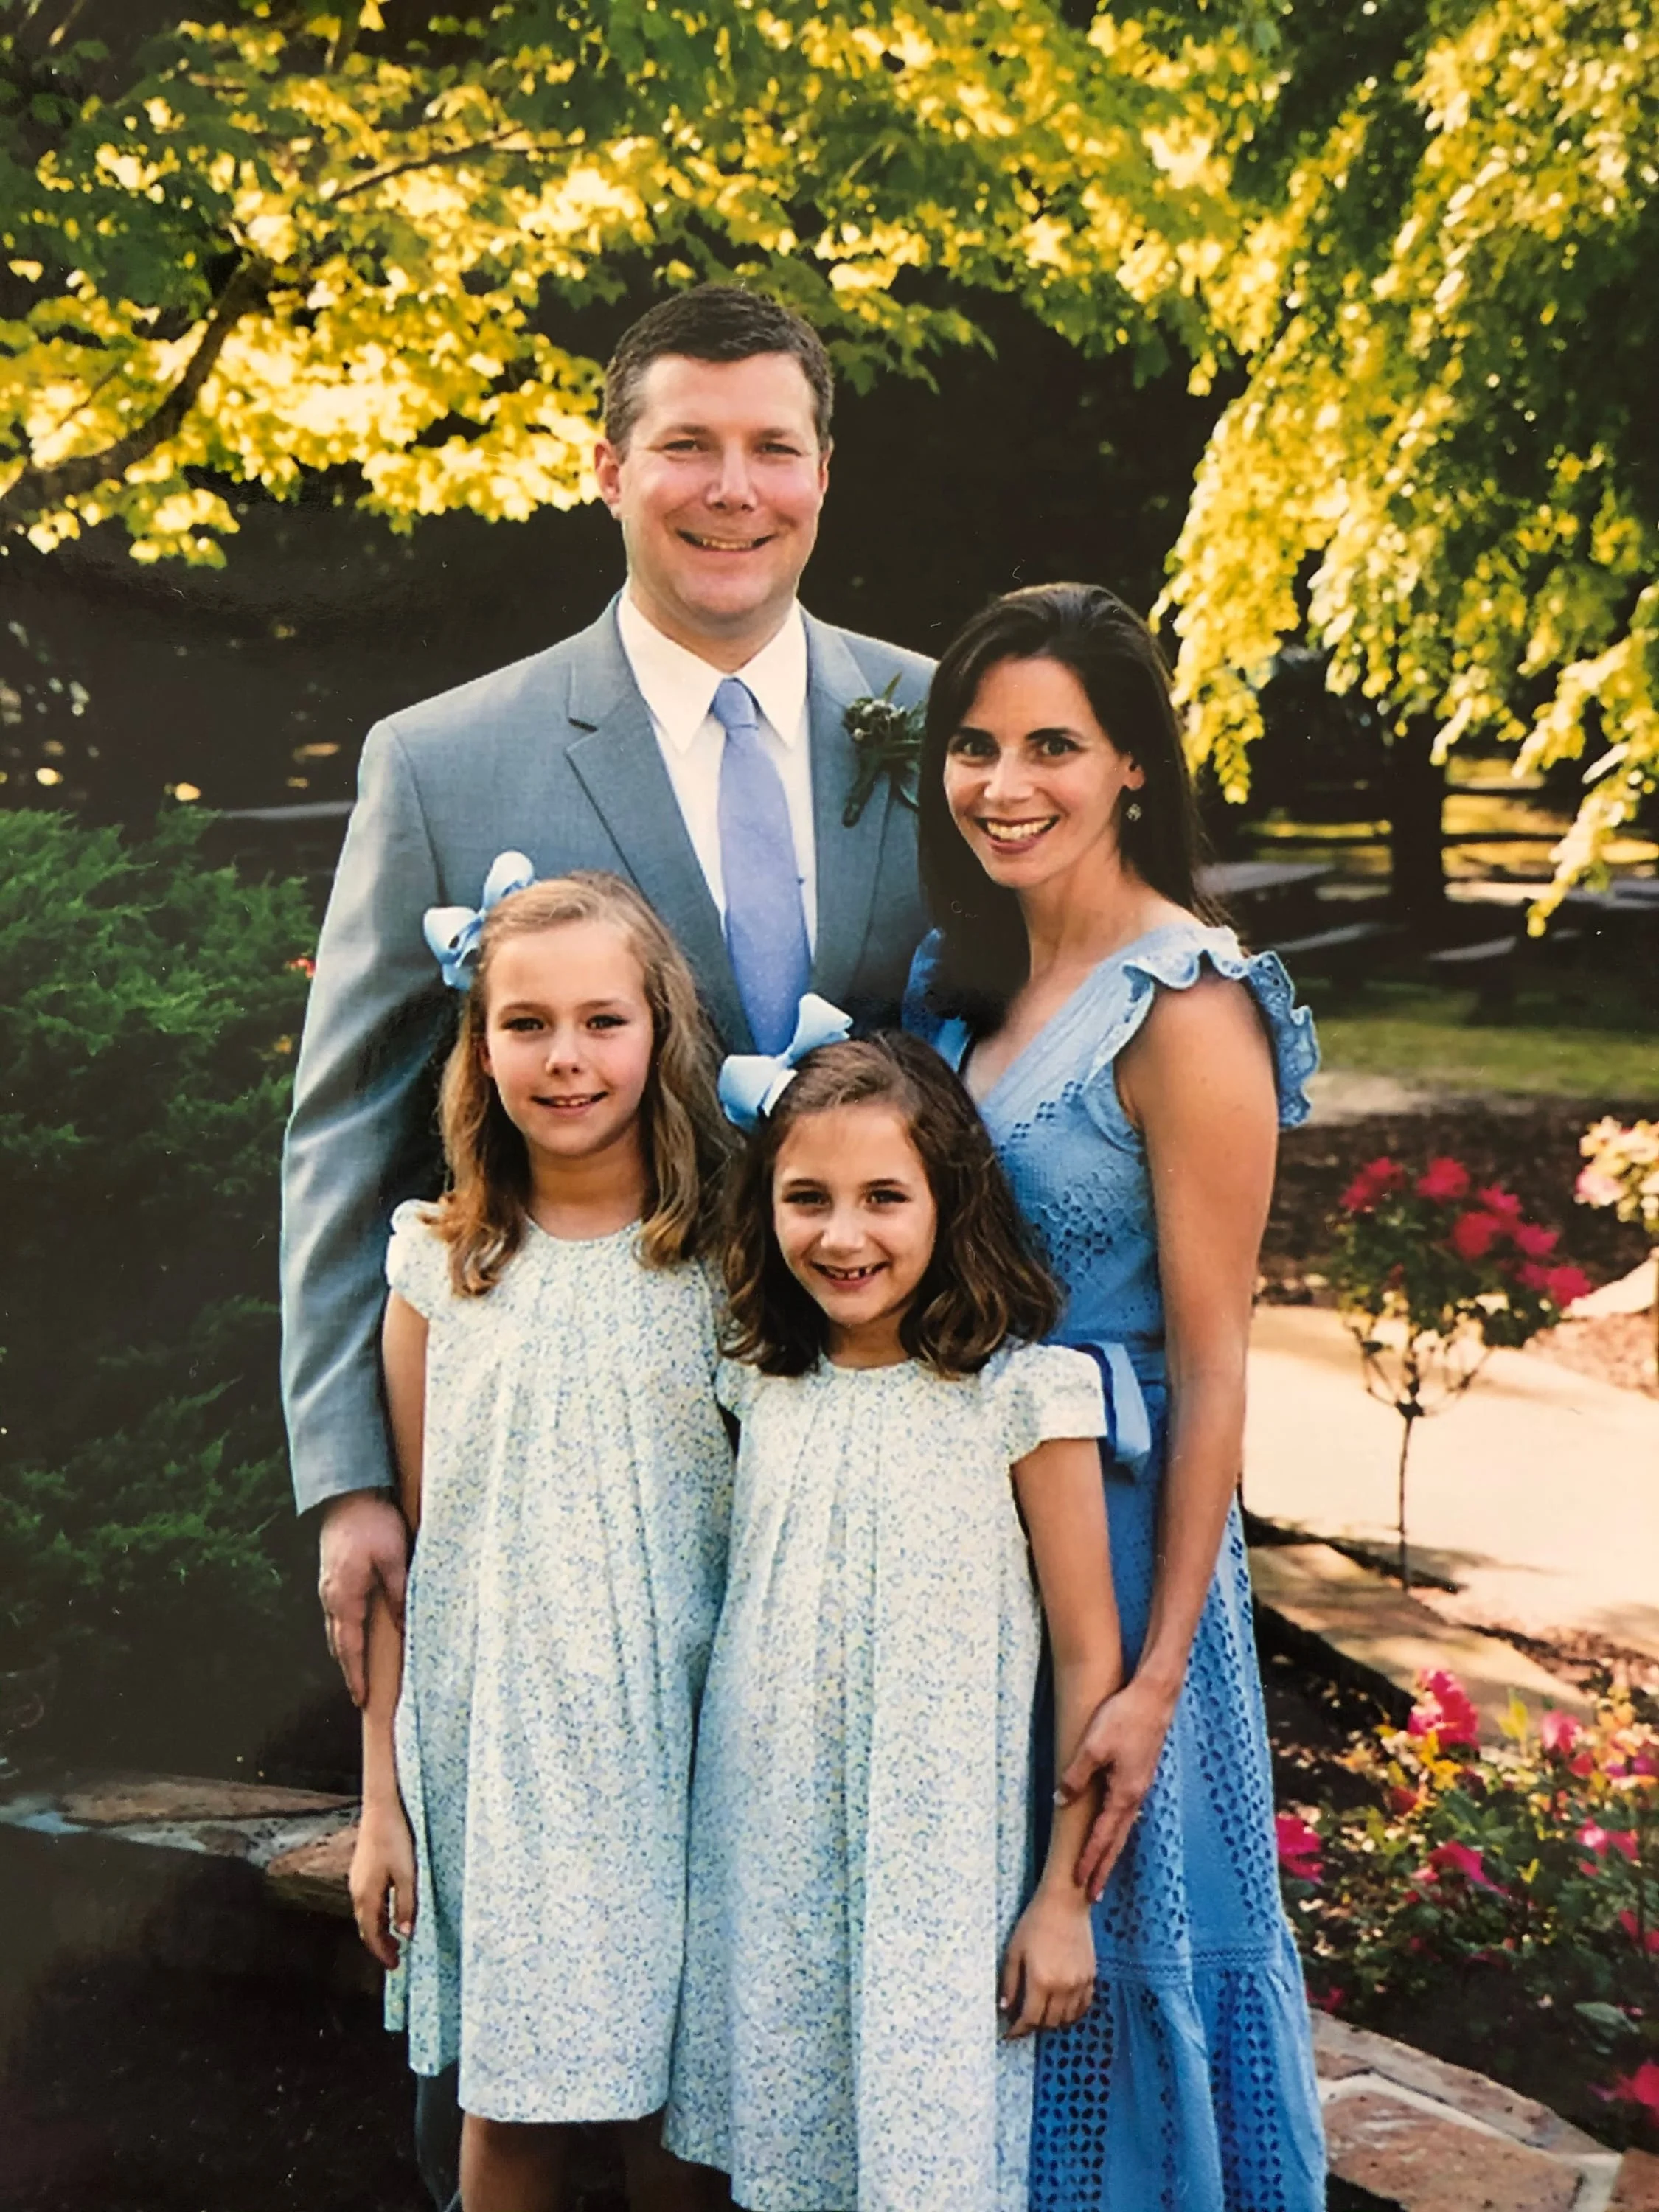 Dr. Hancock, his wife Courtney and their twin girls Ellaree and Hadley (10).